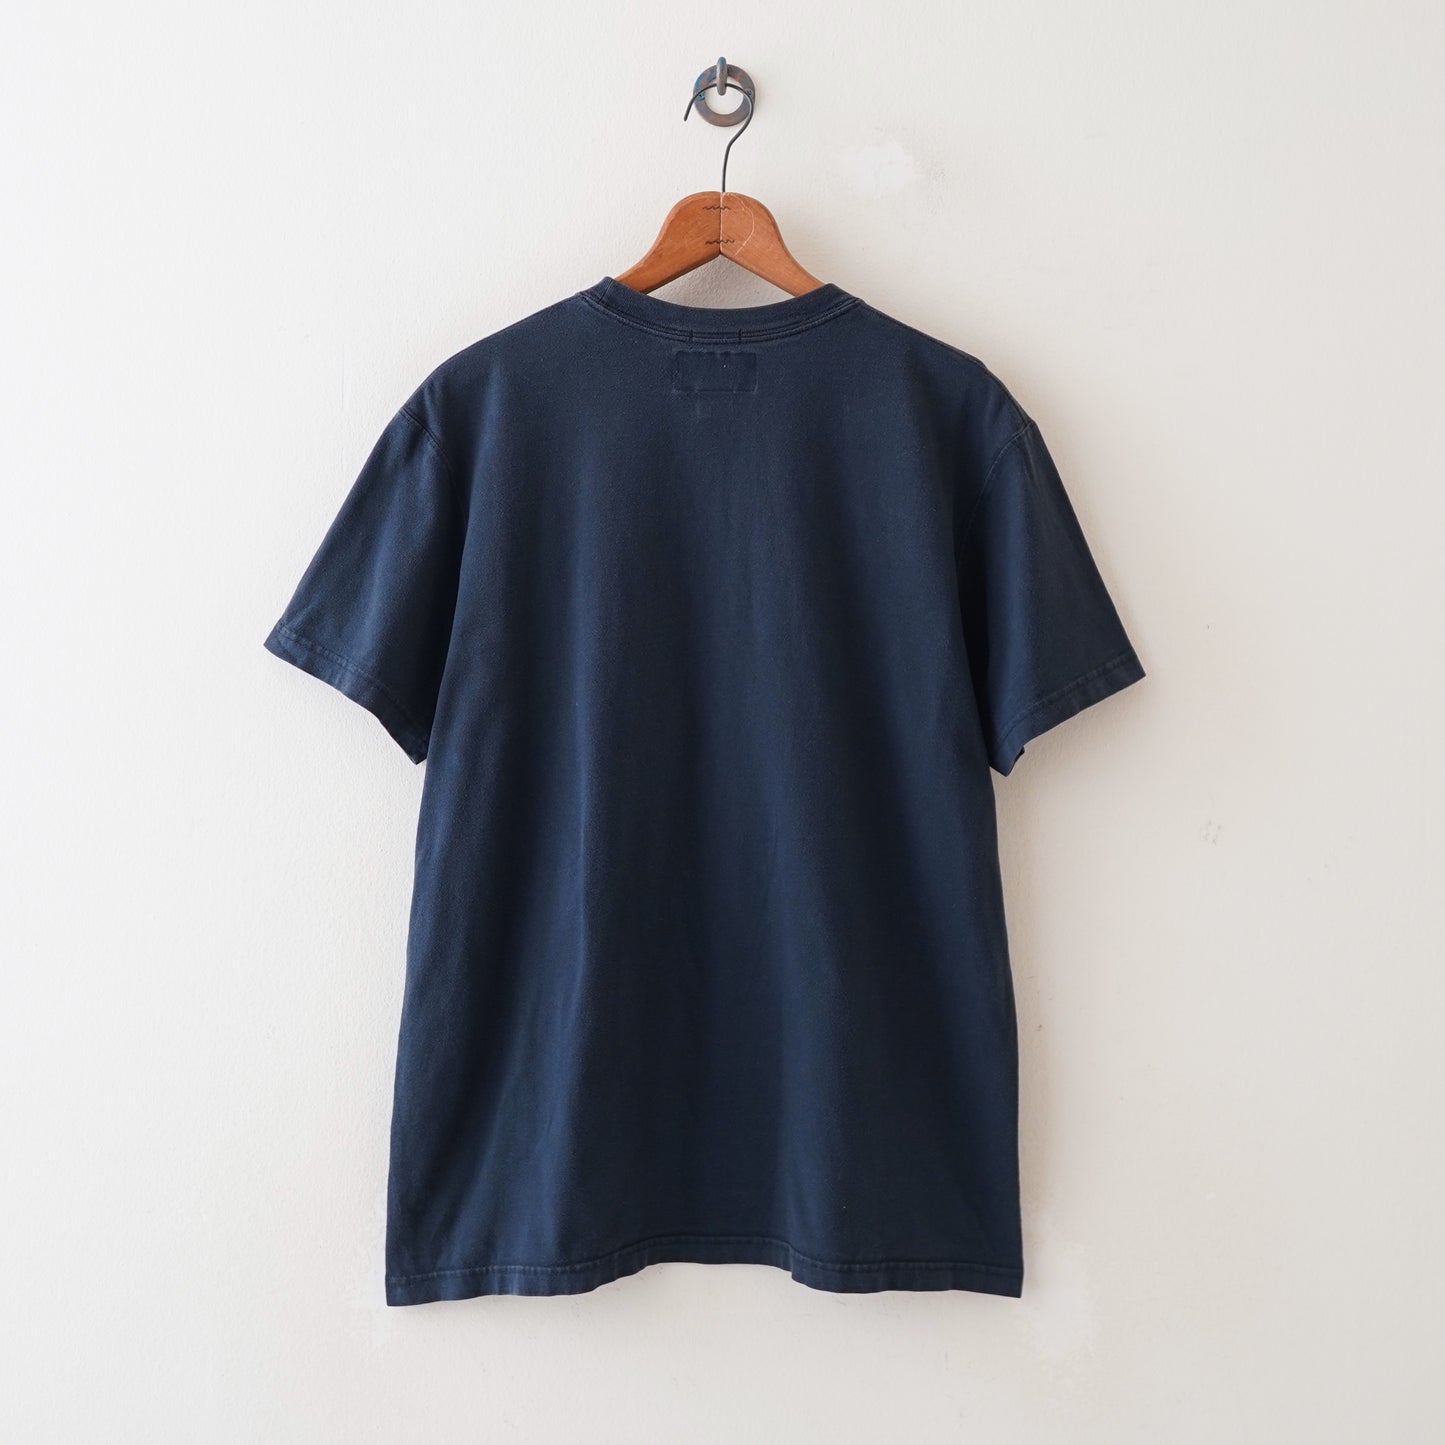 A&F number tee